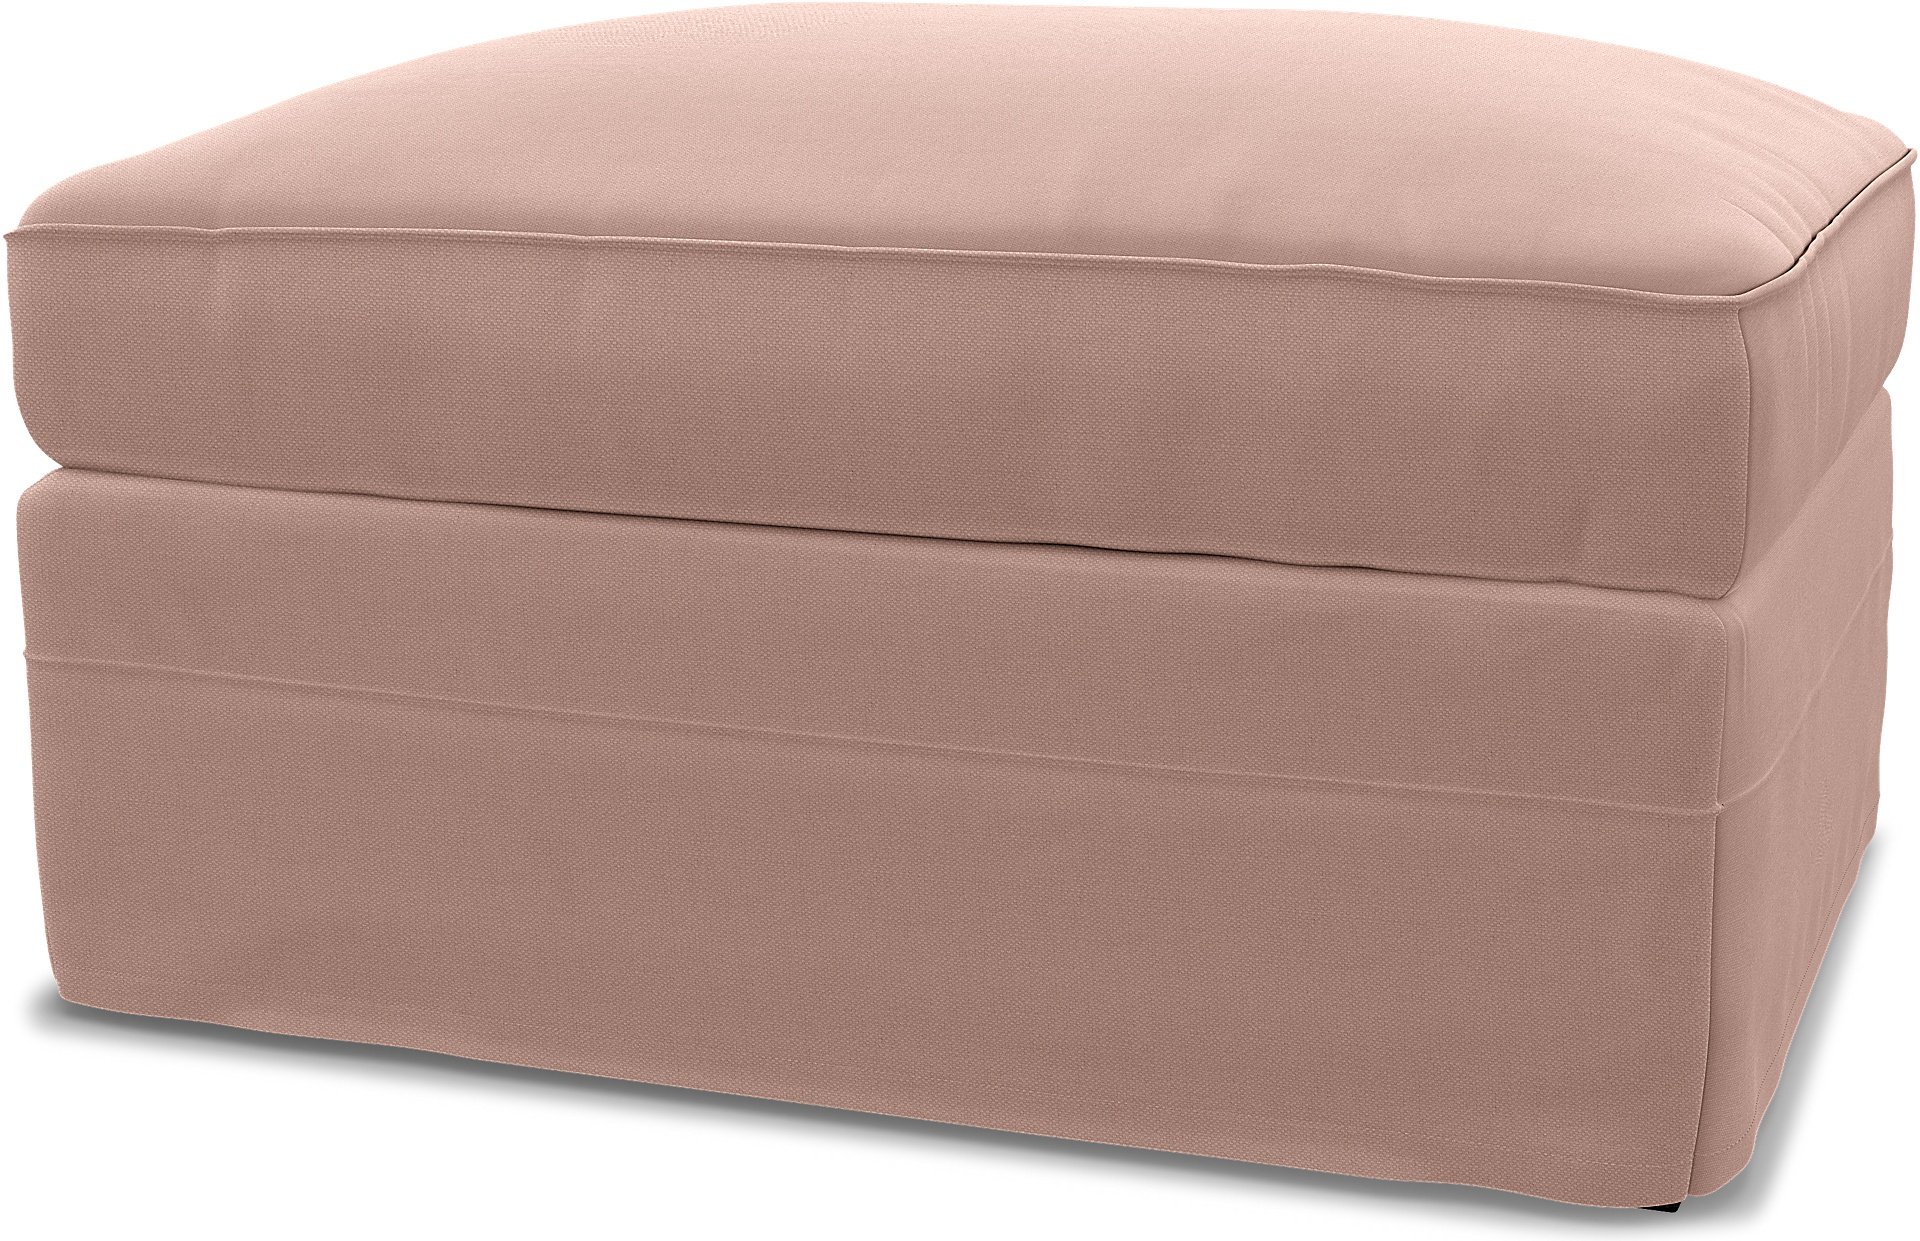 IKEA - Gronlid Footstool with Storage Cover, Blush, Linen - Bemz